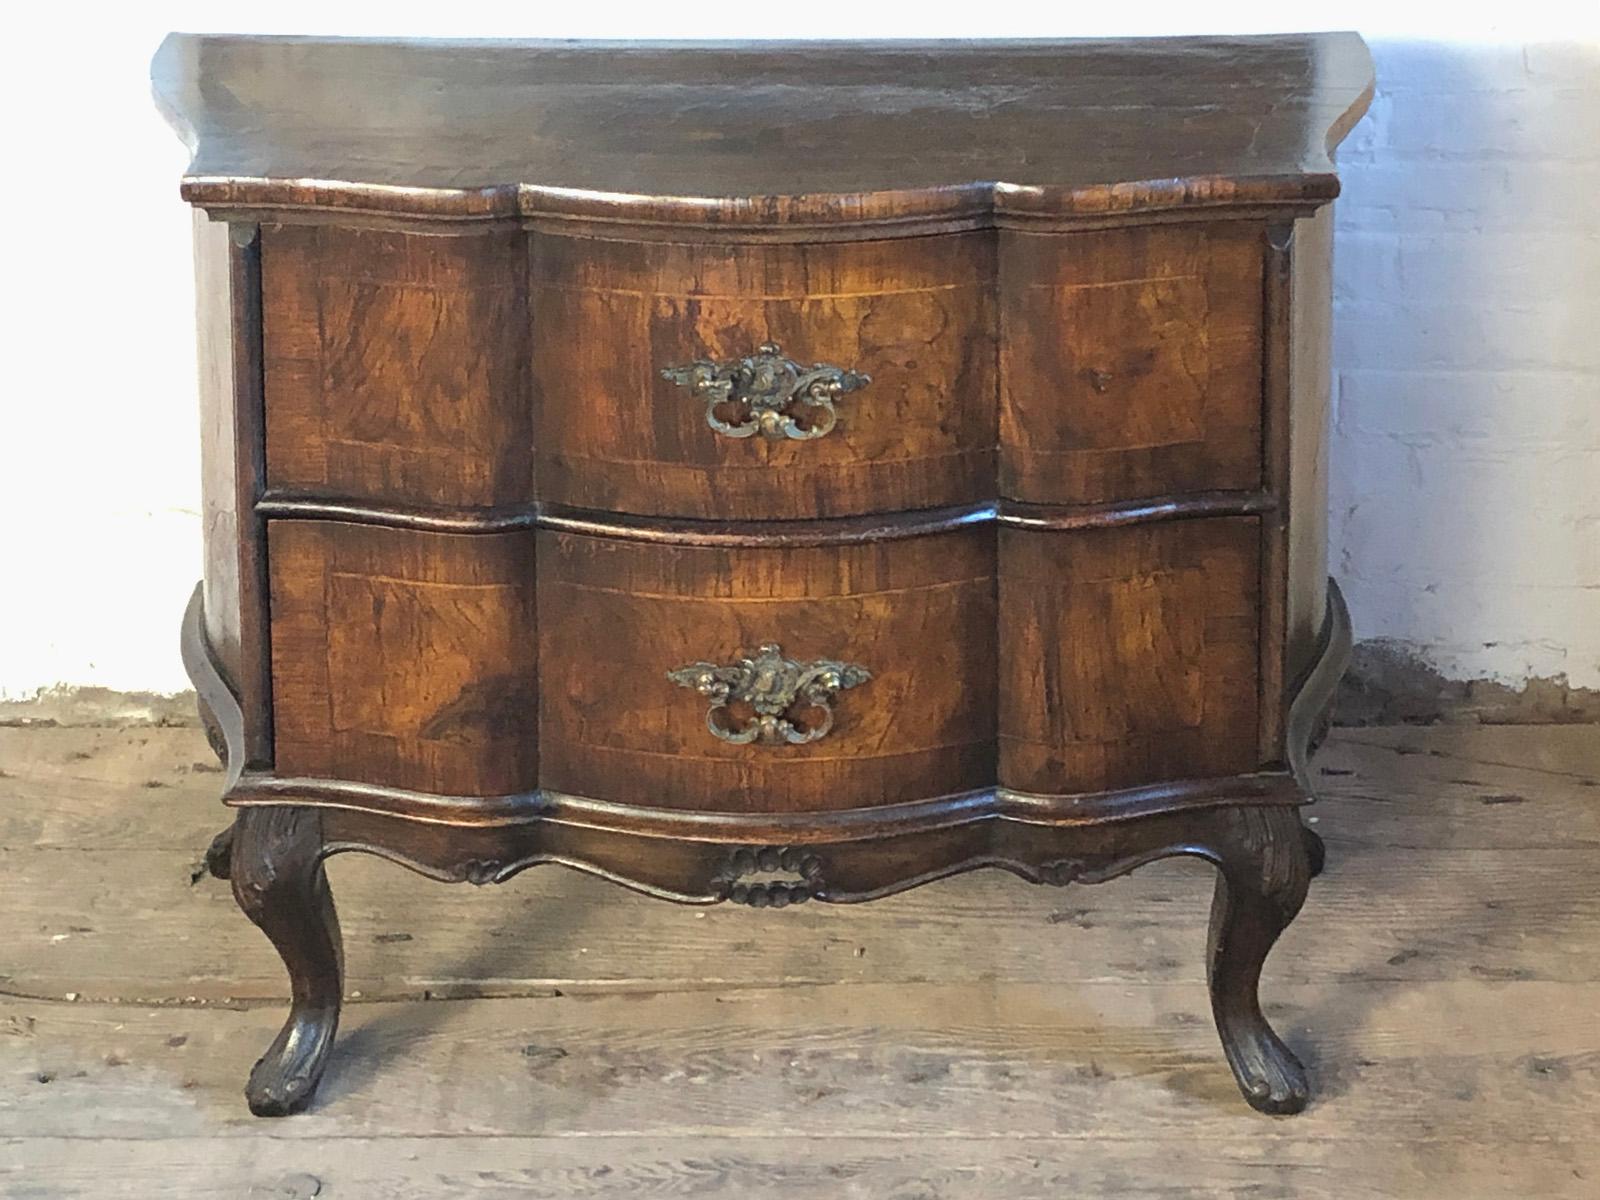 Small Italian (Venice area) Rococo style Serpentine shaped commode, Walnut with thick Radica Veneer and inlay with deep, rich color. Two drawers with ornate, heavy cast brass pulls. 
A very charming, elegant accent piece of petite size and grand